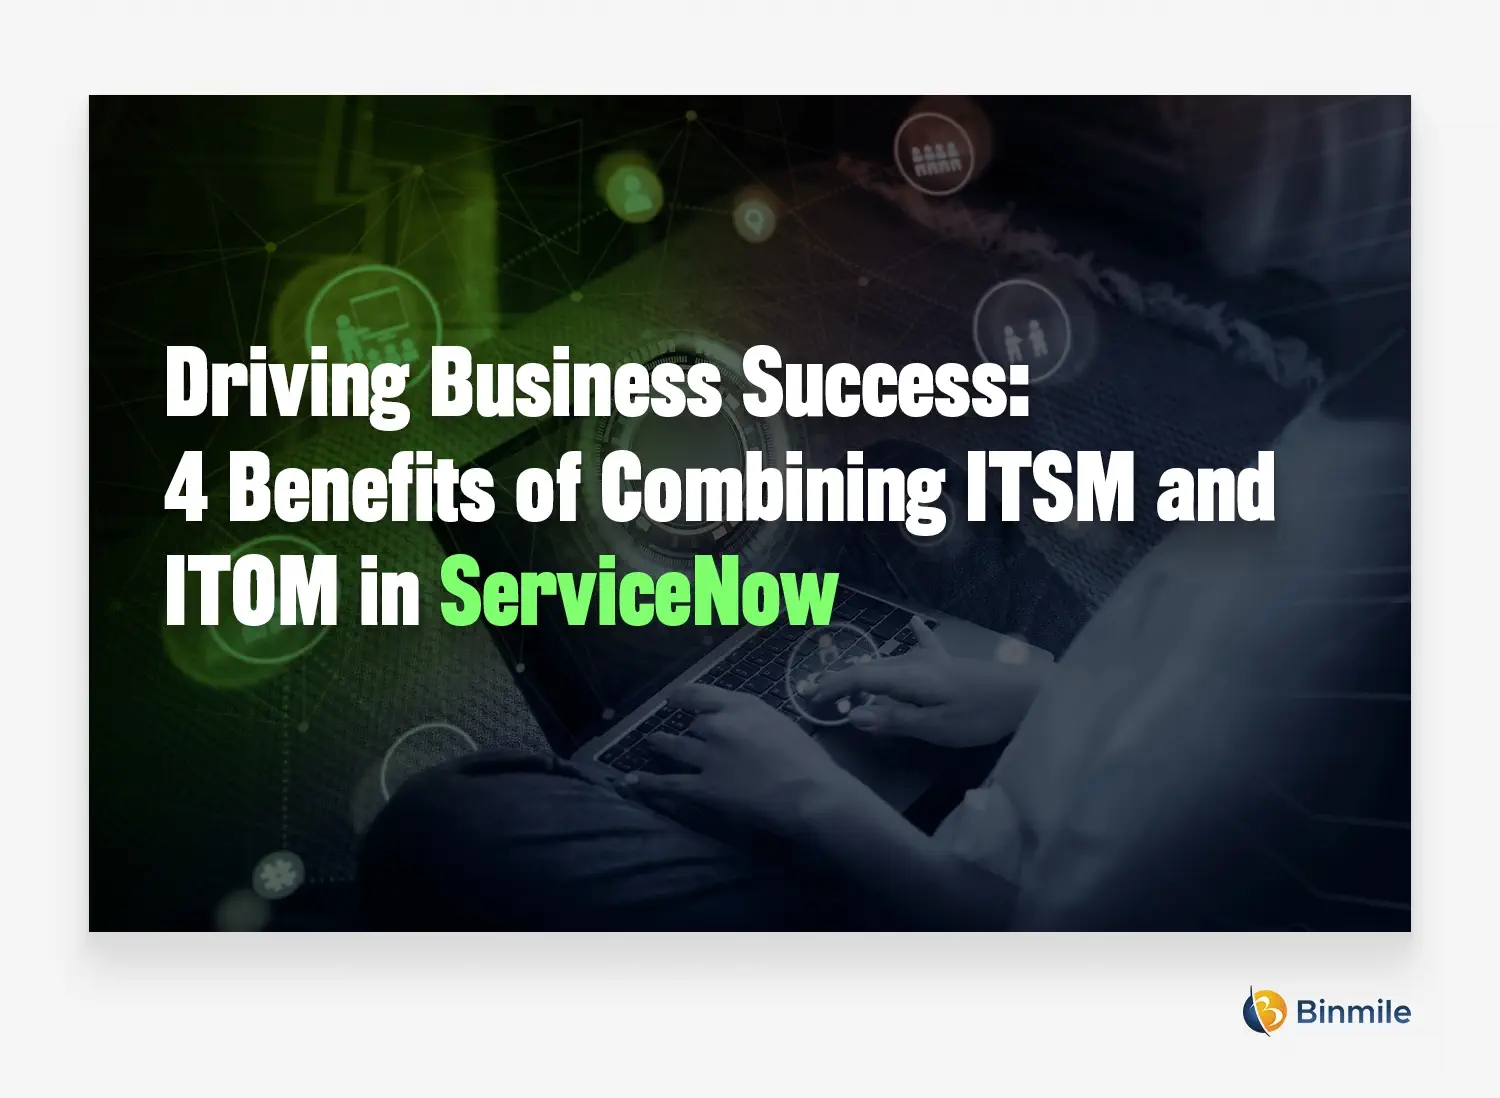 4 Benefits of Combining ITSM and ITOM in ServiceNow | Binmile